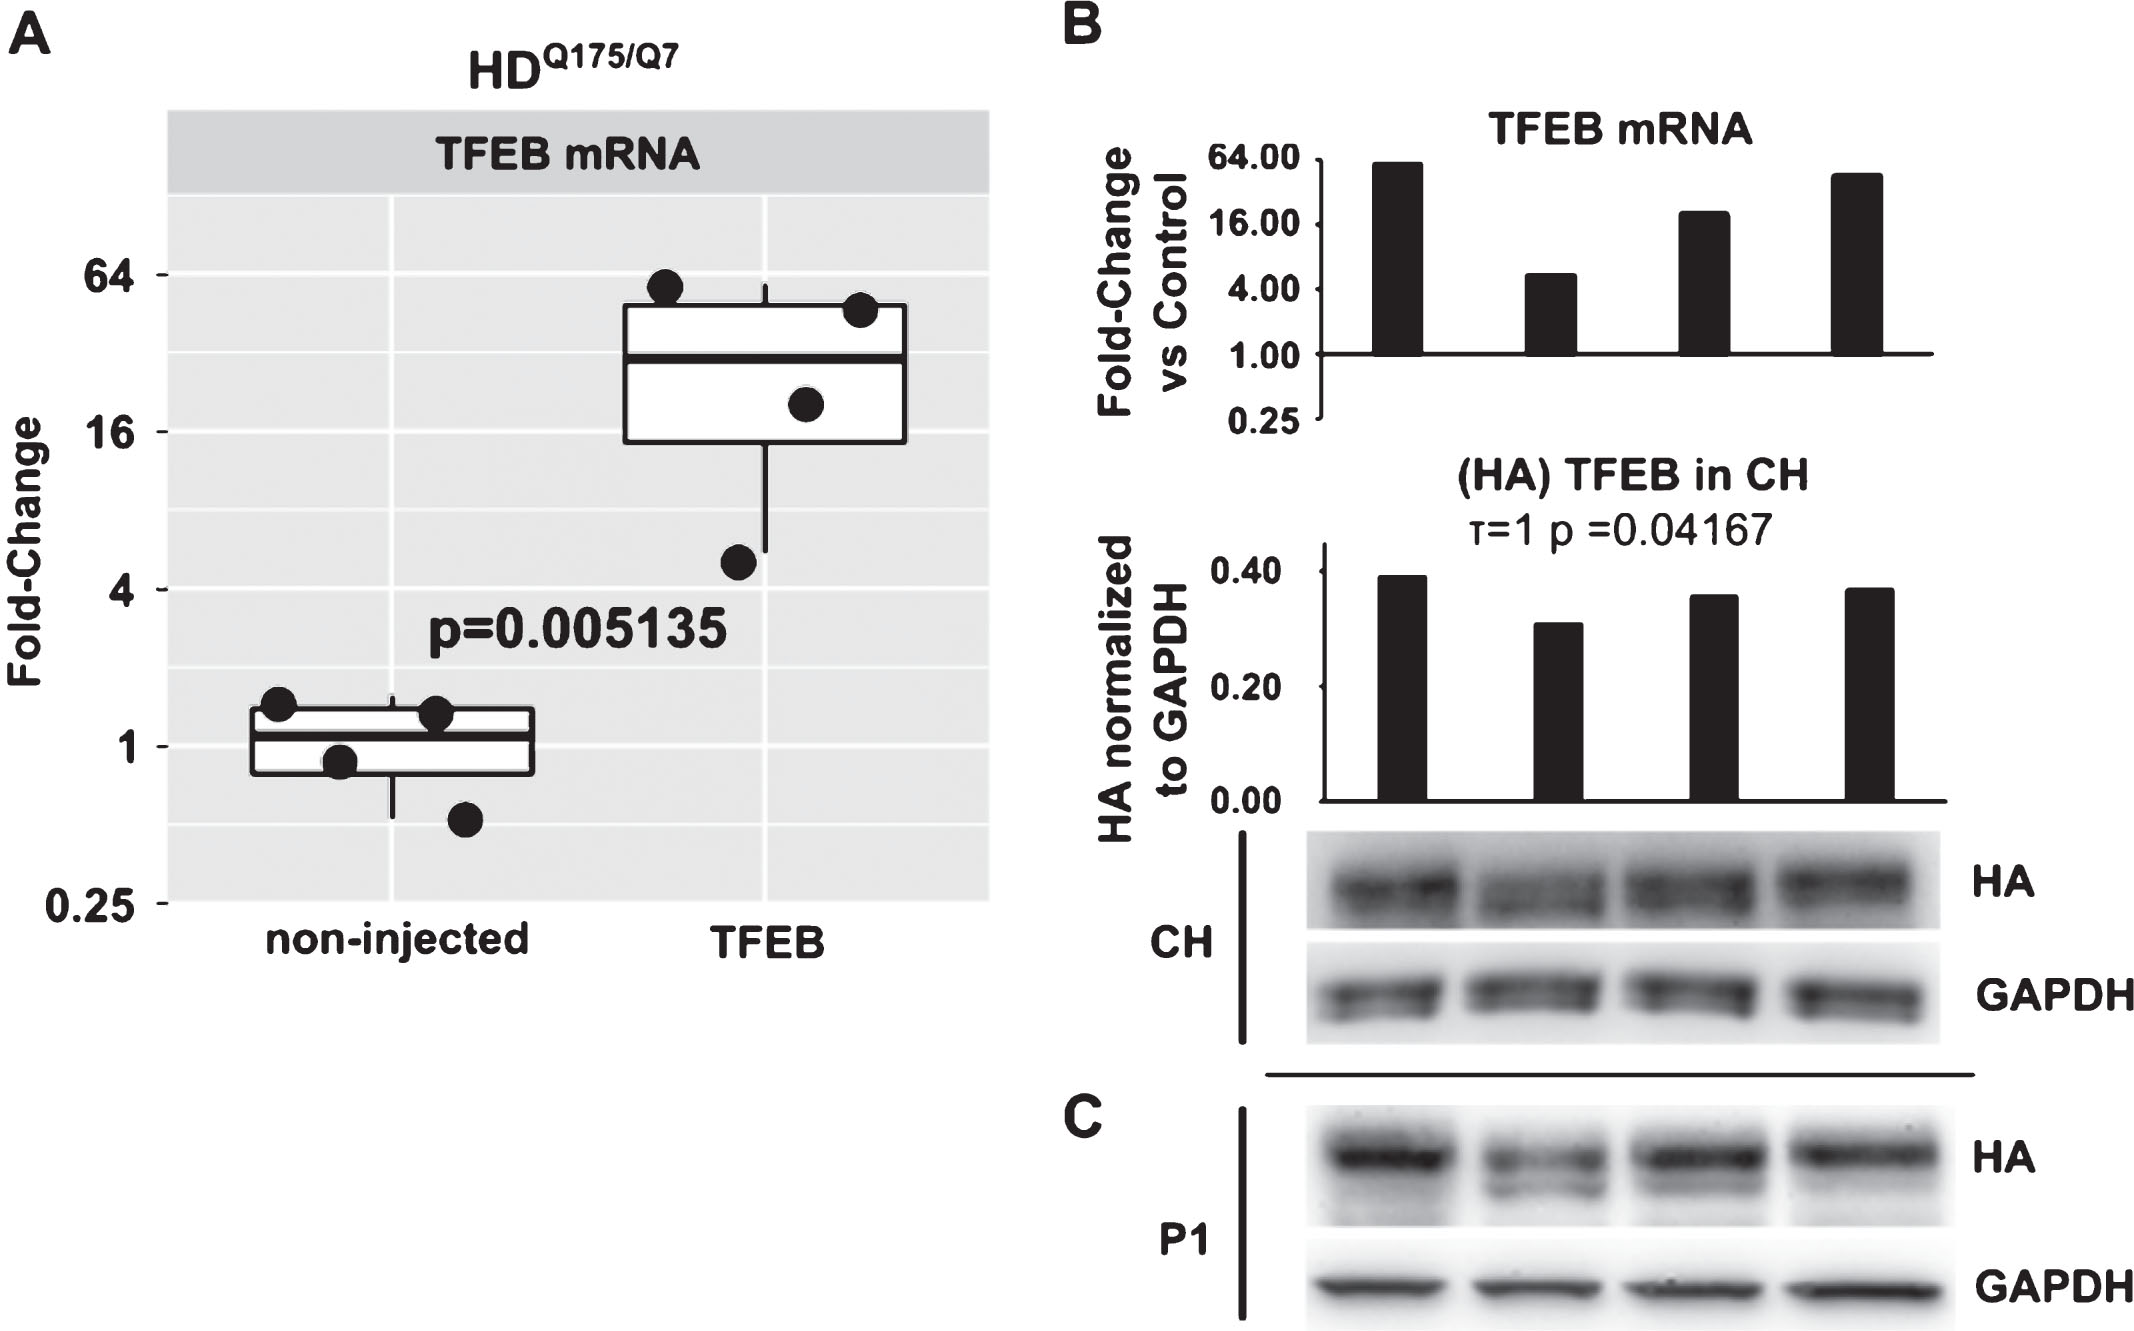 TFEB mRNA quantification by qPCR and comparison to TFEB-HA protein levels. A) Relative quantification of TFEB mRNA in non-injected and AAV hSyn1 TFEB-HA injected HDQ175/Q7 mice. Data are presented as a fold-change over mean of control group (non-injected). Each point represents individual mouse and boxplots show overall data distribution (N = 4 mice per group). P-value from unpaired t-test. B) Comparison of TFEB mRNA levels in individual animals to TFEB-HA protein levels detected by HA antibody. Bar graphs show relative fold-change over mean of control group for mRNA and HA densitometry signal in crude homogenate normalized to GAPDH for protein. Kendall tau correlation coefficient and corresponding p-value for mRNA/ crude homogenate protein level is provided. C) Western blot for TFEB-HA protein levels as detected by HA antibody in P1 nuclear enriched fraction.